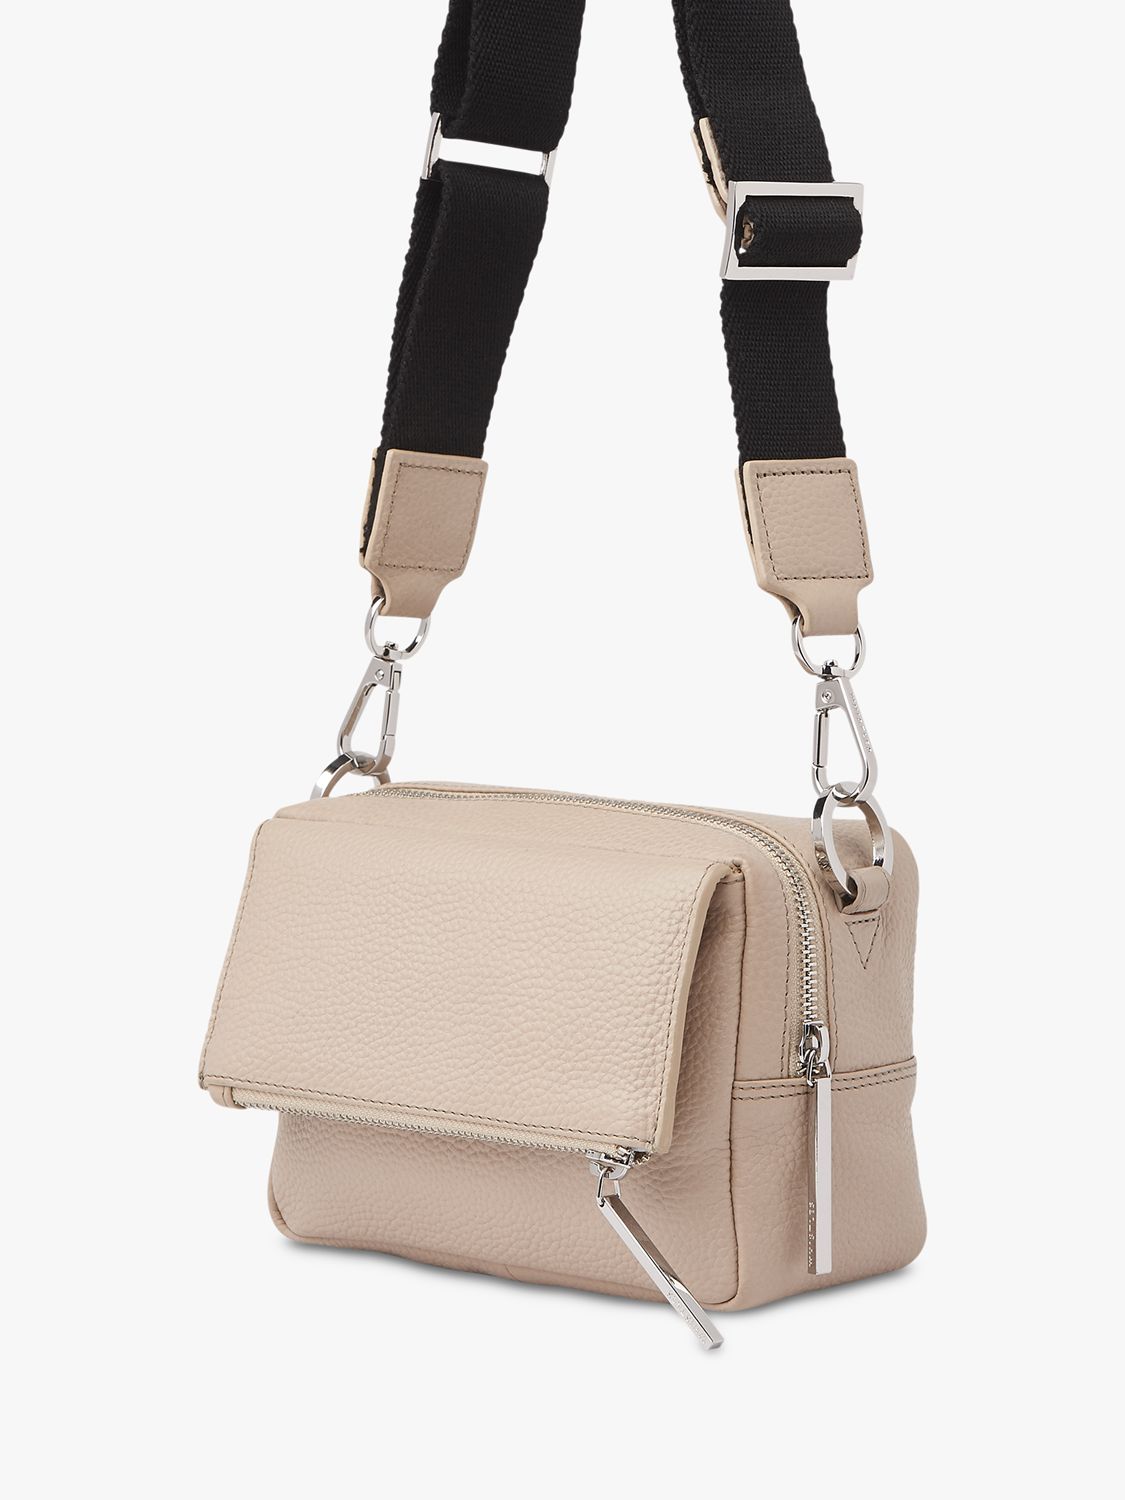 Whistles Bibi Leather Cross Body Bag, Soft Taupe, One Size